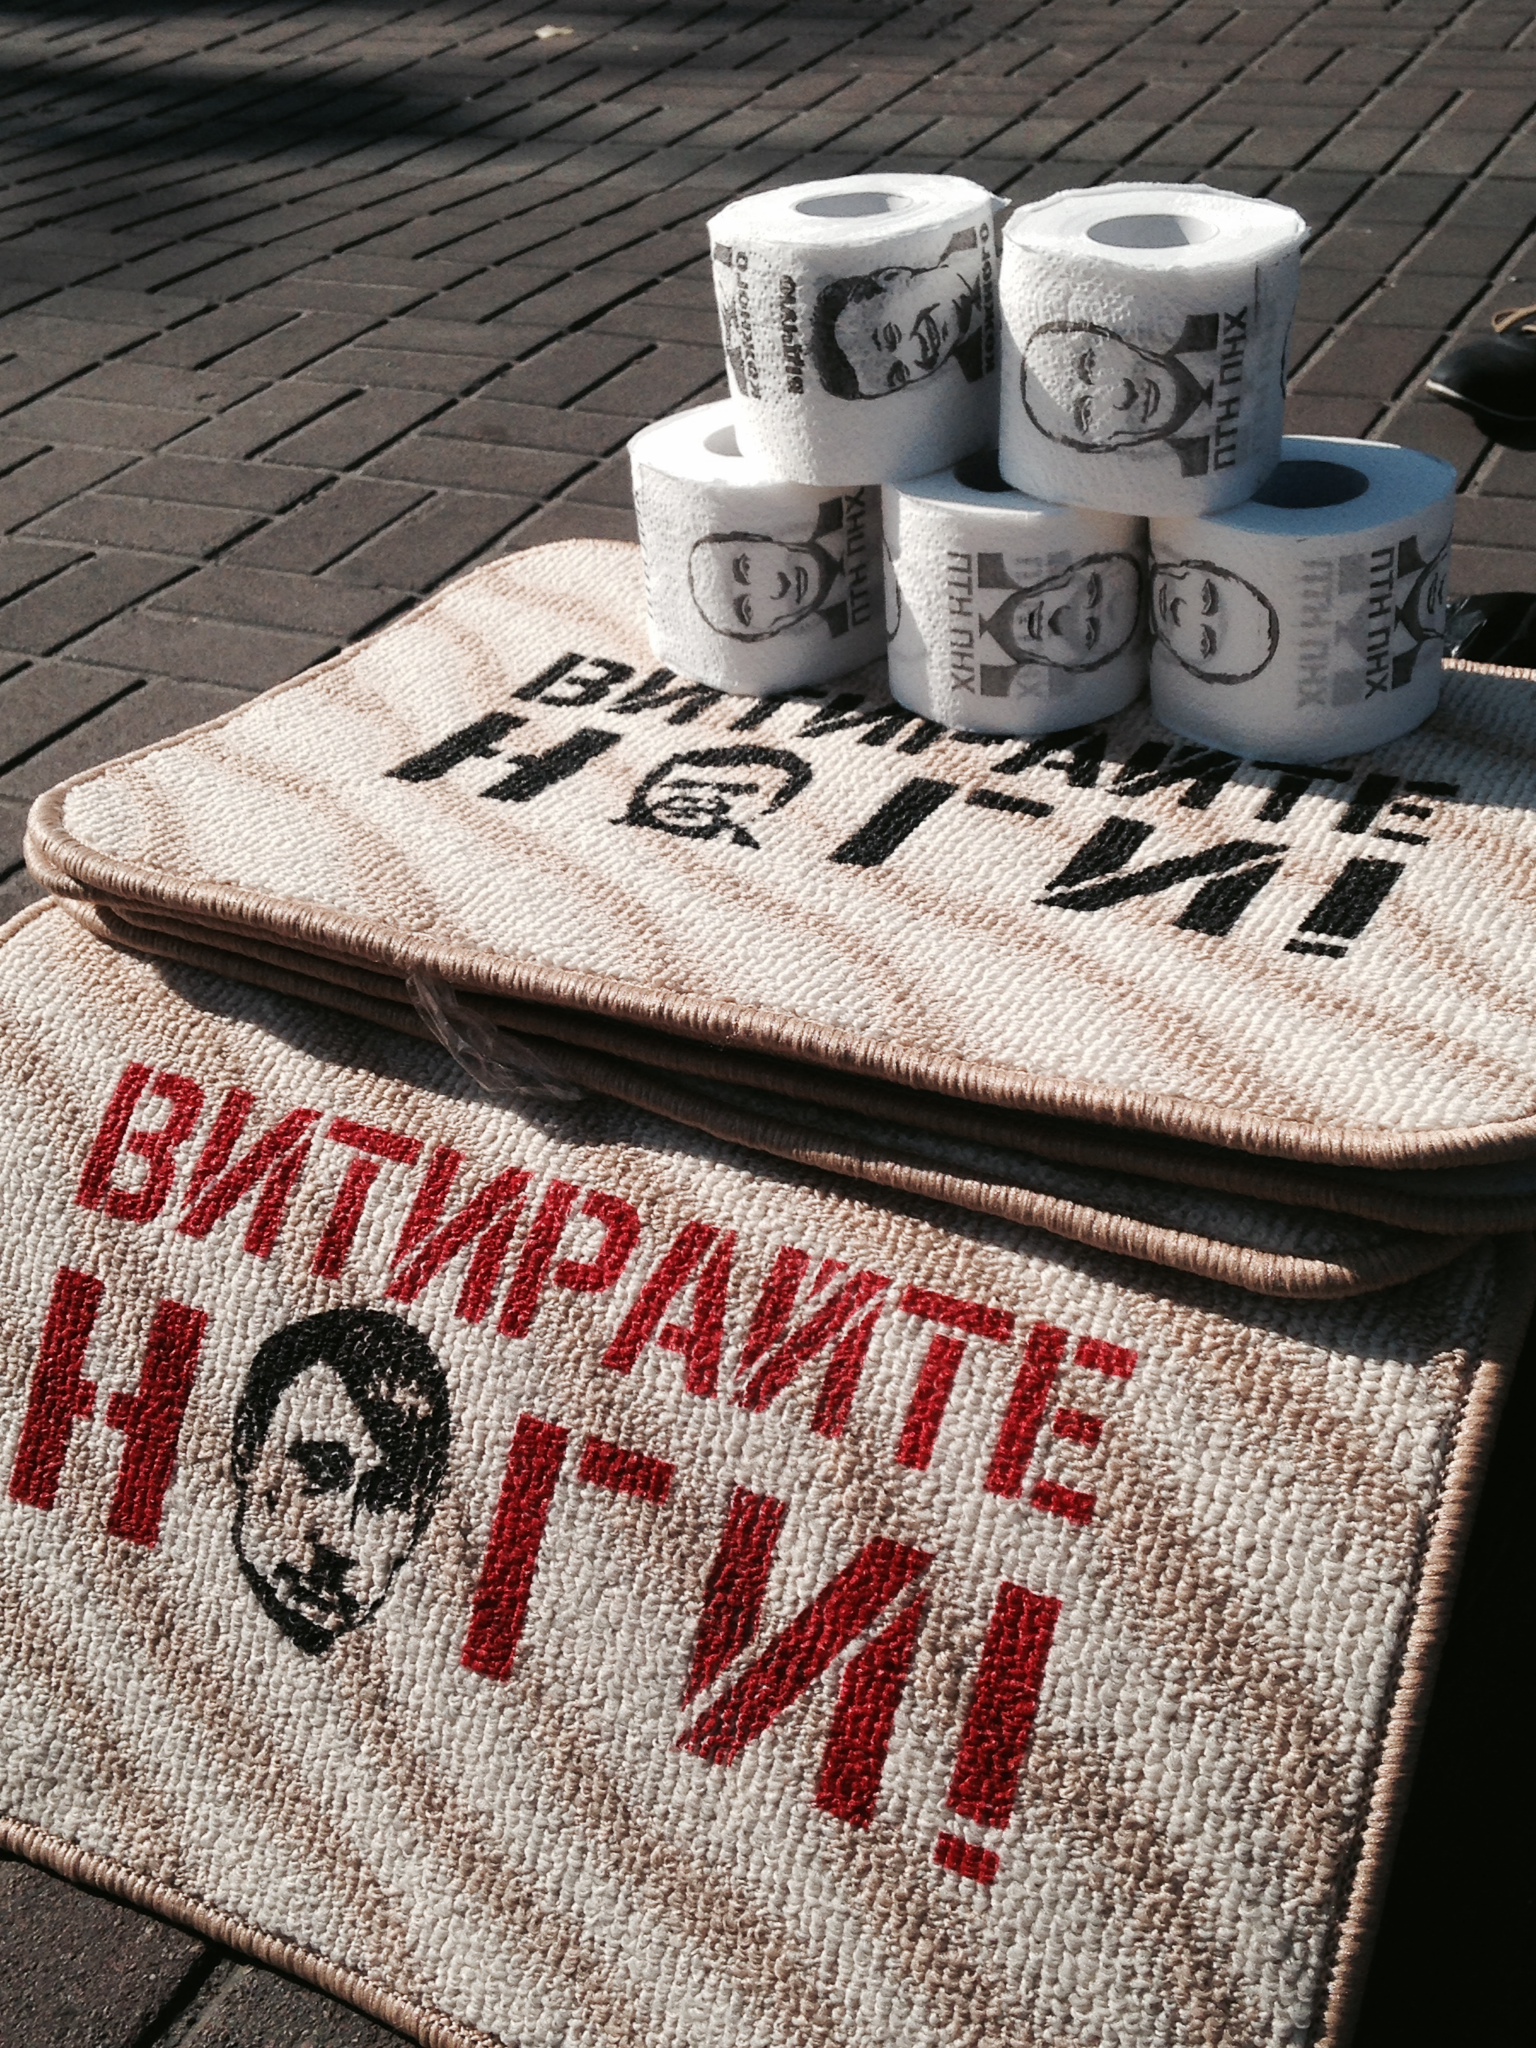 Depictions of Russian President Vladimir Putin for sale on Kyiv’s Independence Square. (Photo: Nolan Peterson/The Daily Signal)